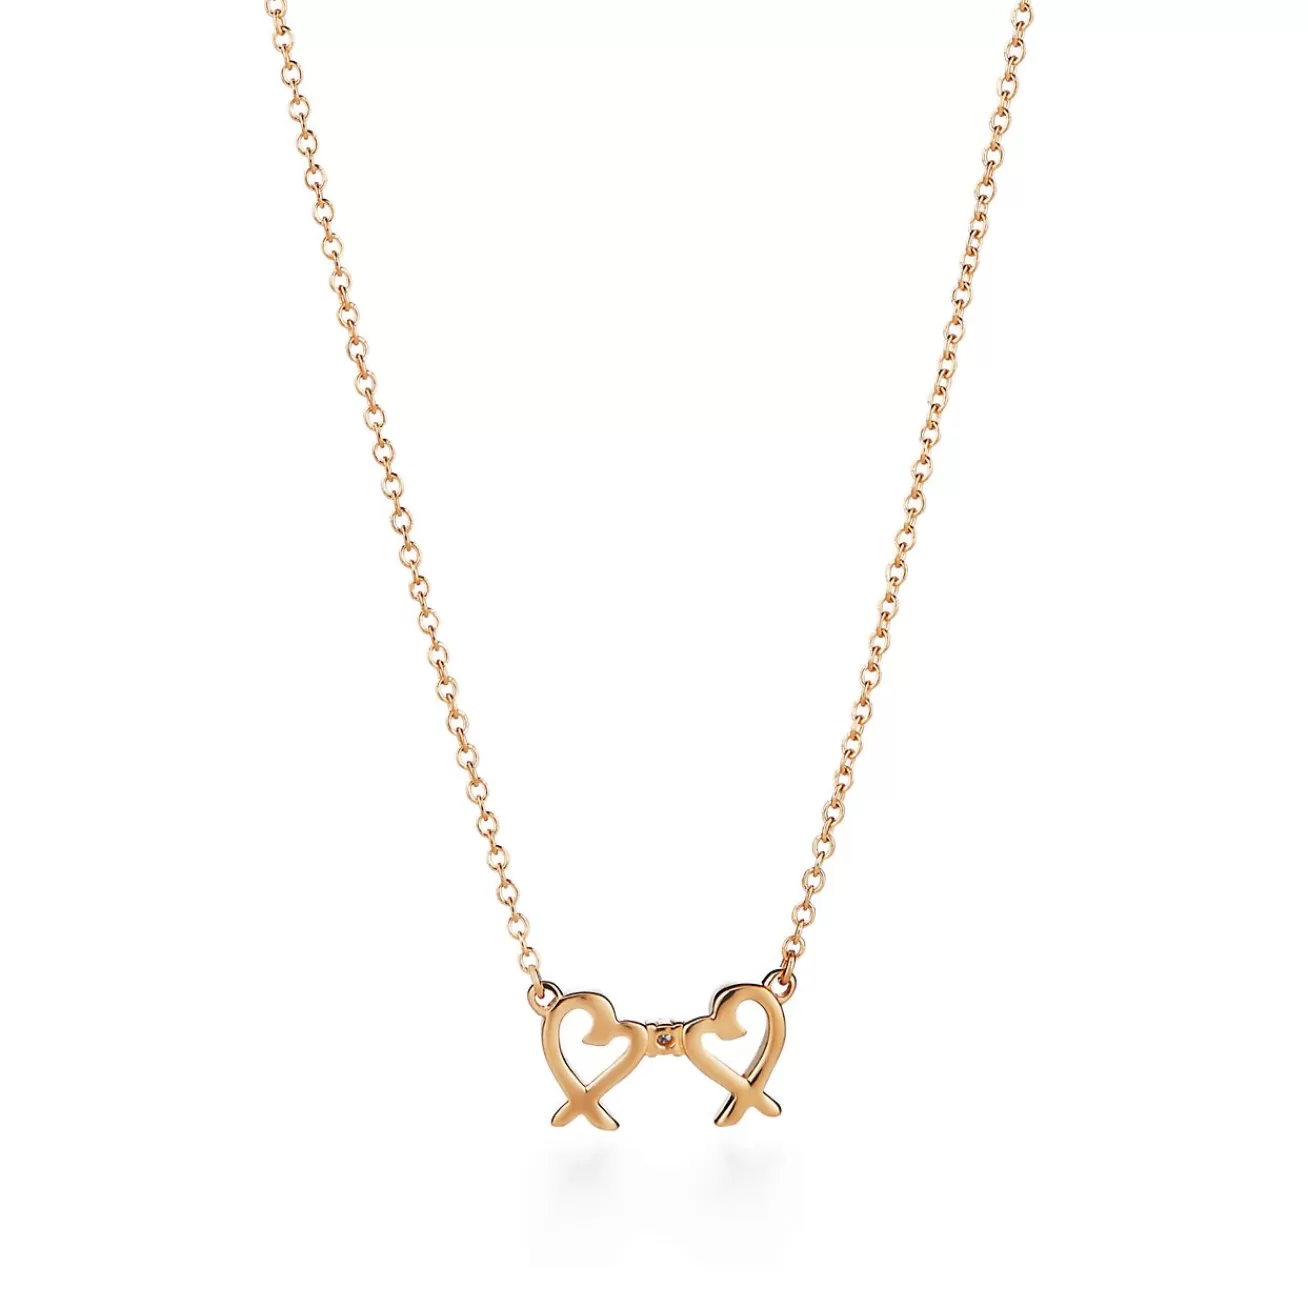 Tiffany & Co. Paloma Picasso® Double Loving Heart pendant in 18k gold with diamonds. | ^ Necklaces & Pendants | Gold Jewelry